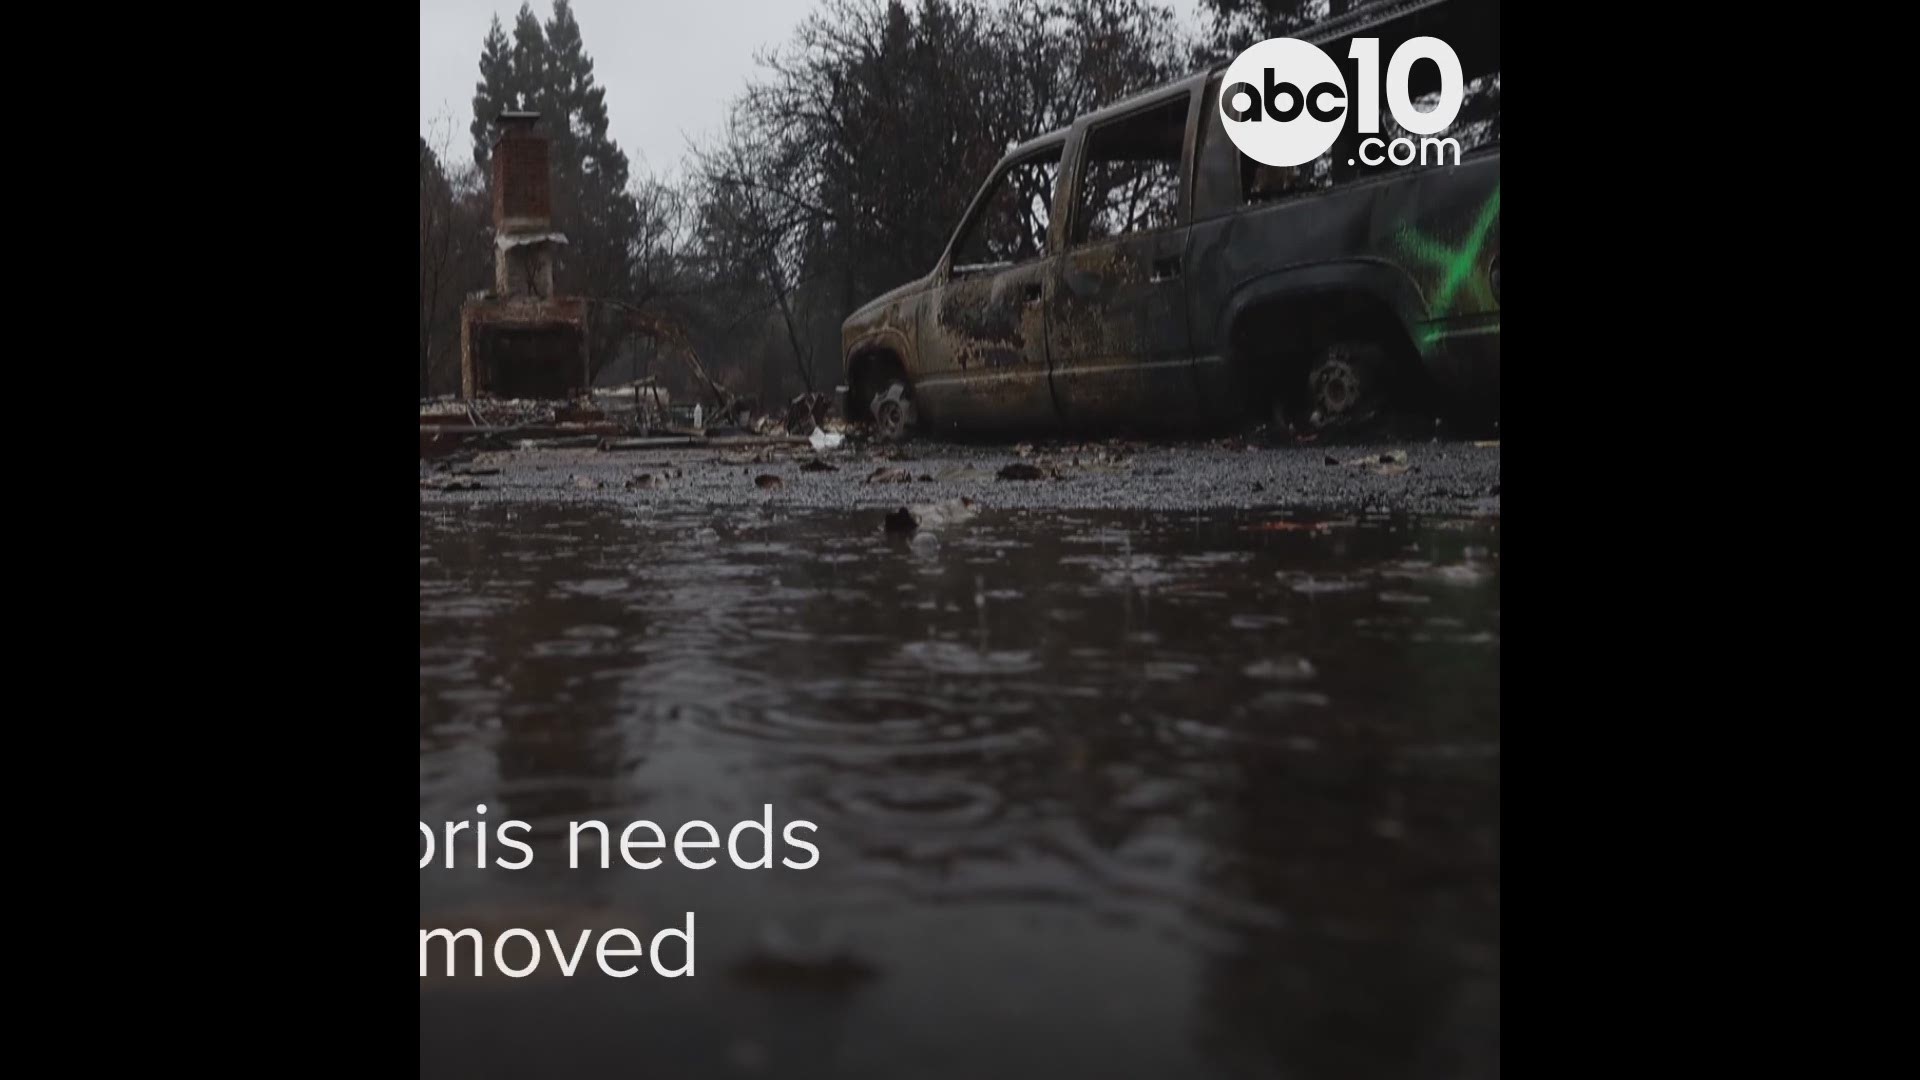 There is an estimated 5,341,362 tons of debris from destroyed homes and business, according to a state-hired contractor who conducted the assessment.